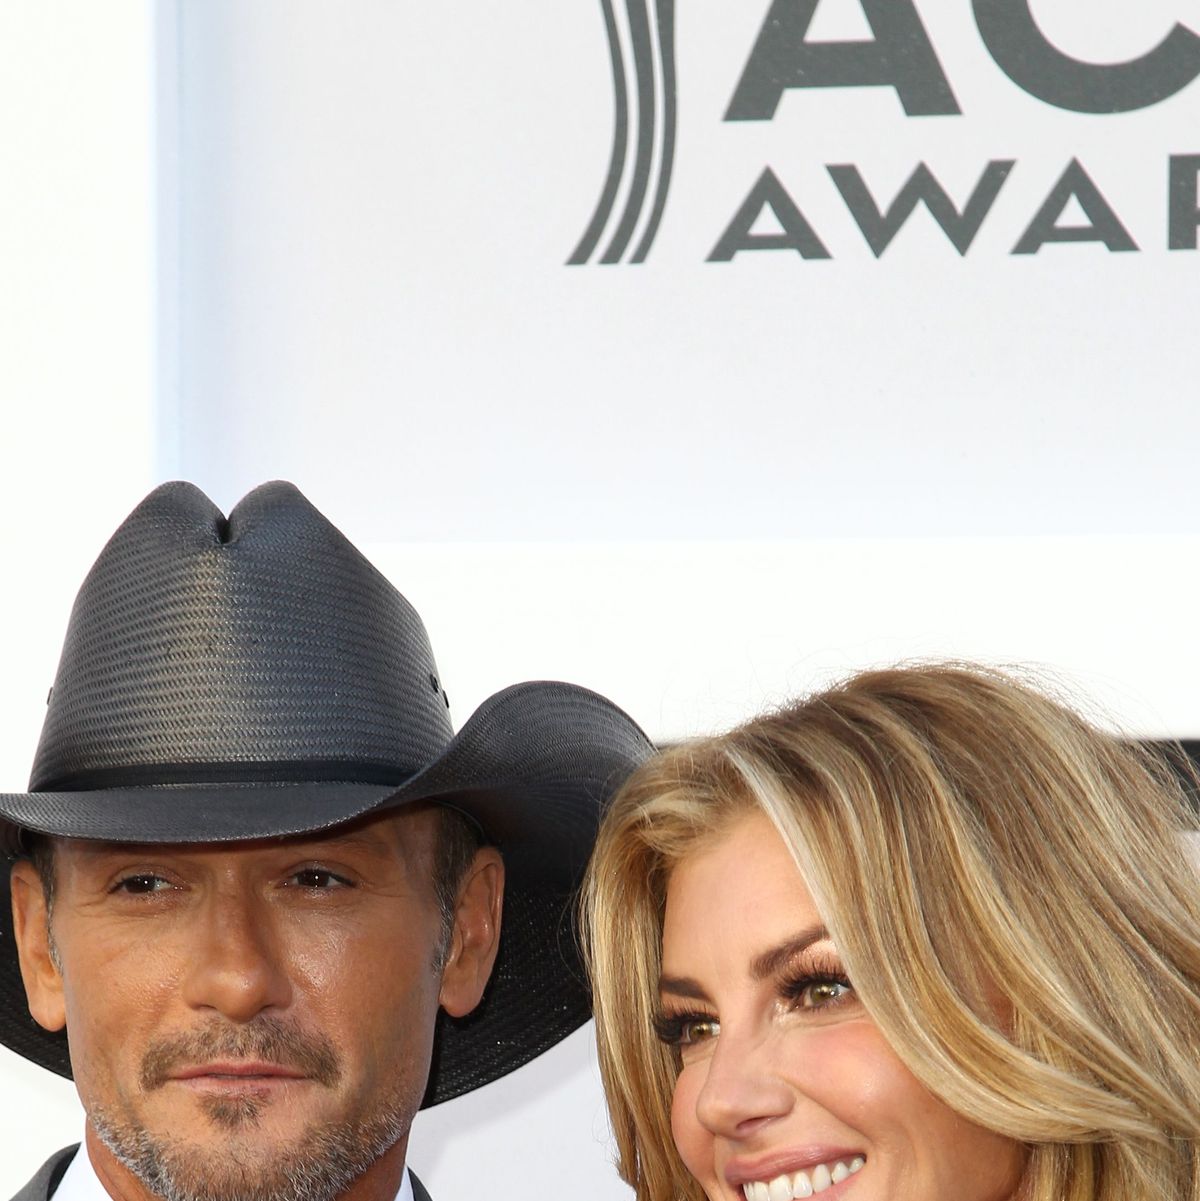 Fans Urge Faith Hill to “Protect” Tim McGraw After Seeing Heart-Pumping Instagram